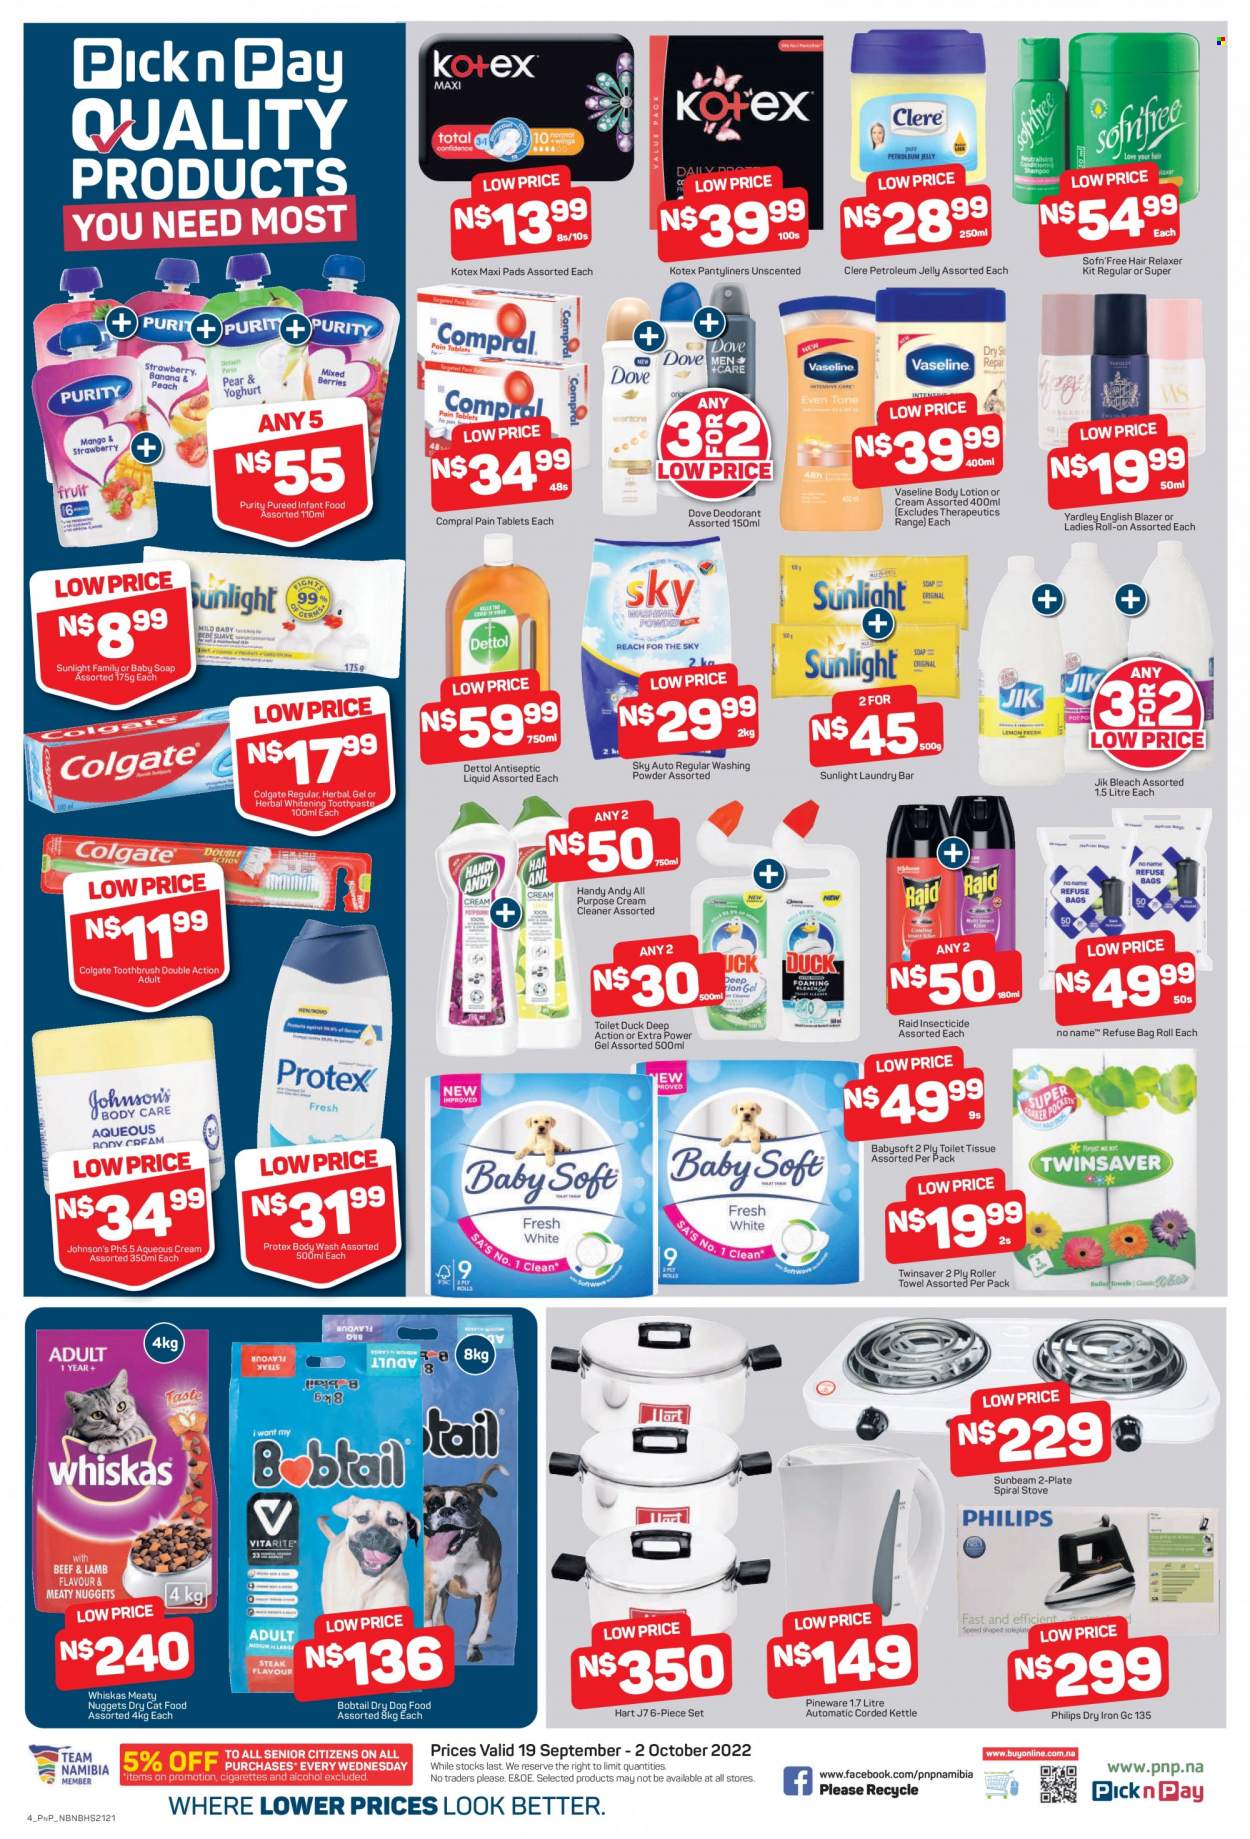 Pick n Pay catalogue  - 19/09/2022 - 02/10/2022 - Sales products - Dove, kettle, alcohol, Purity, Johnson's, Dettol, cream cleaner, bleach, cleaner, laundry powder, laundry soap bar, Sunlight, body wash, Protex, Vaseline, soap, Colgate, toothbrush, toothpaste, sanitary pads, Kotex, pantyliners, petroleum jelly, relaxer, body lotion, Clere, insecticide, Raid, Philips, animal food, cat food, dog food, Whiskas, dry dog food, dry cat food. Page 2.